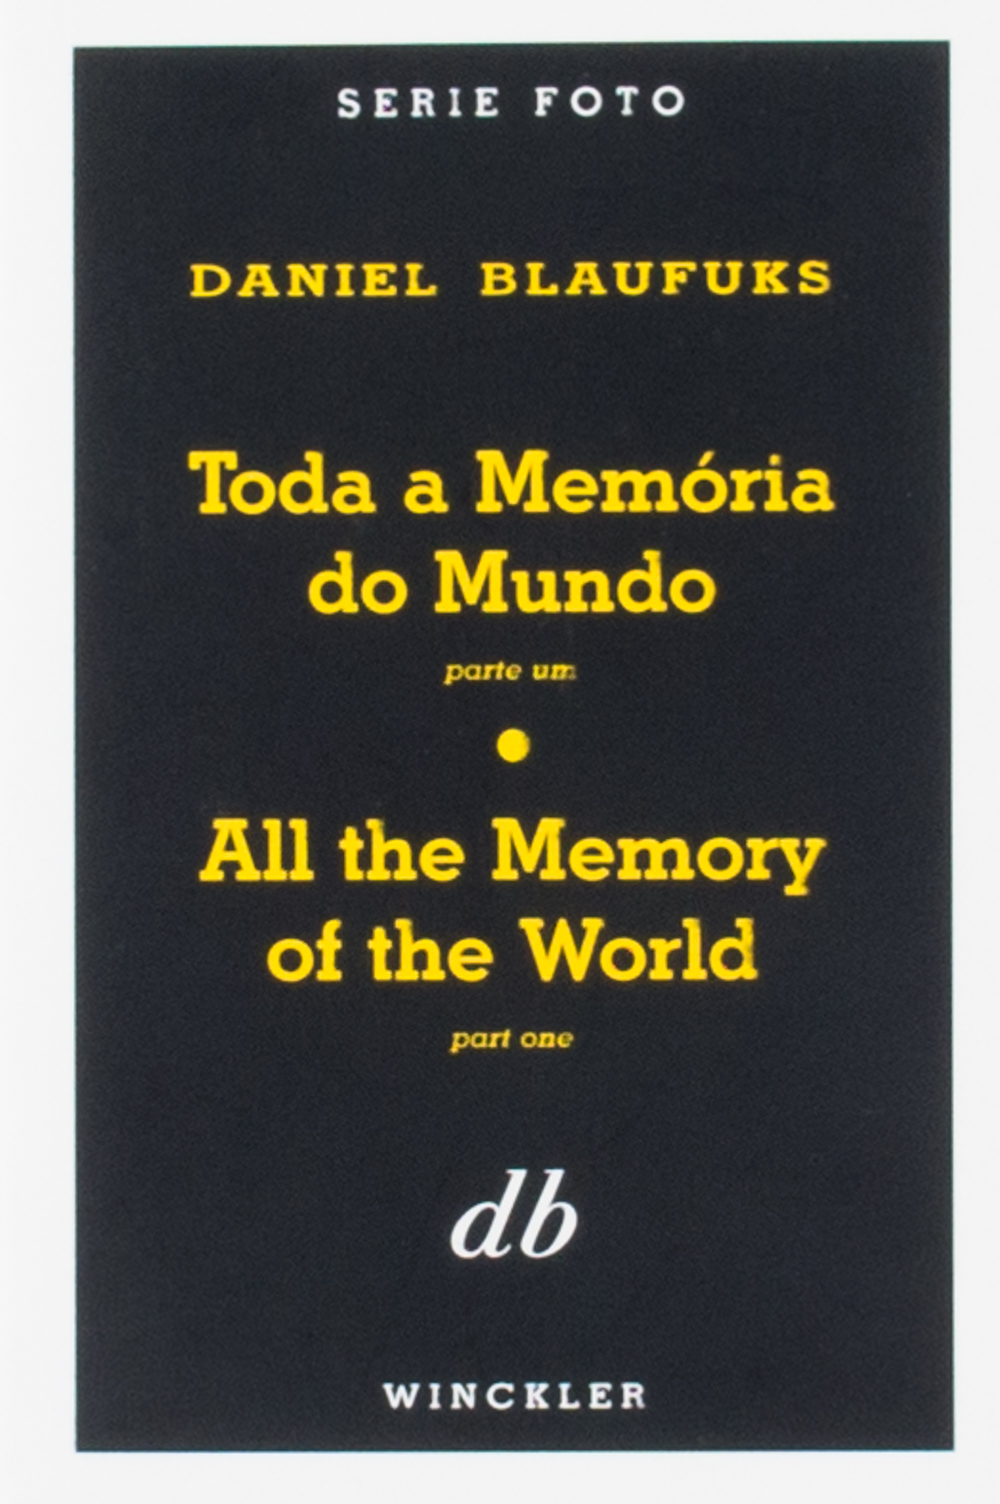 All the Memory of the World, Part One